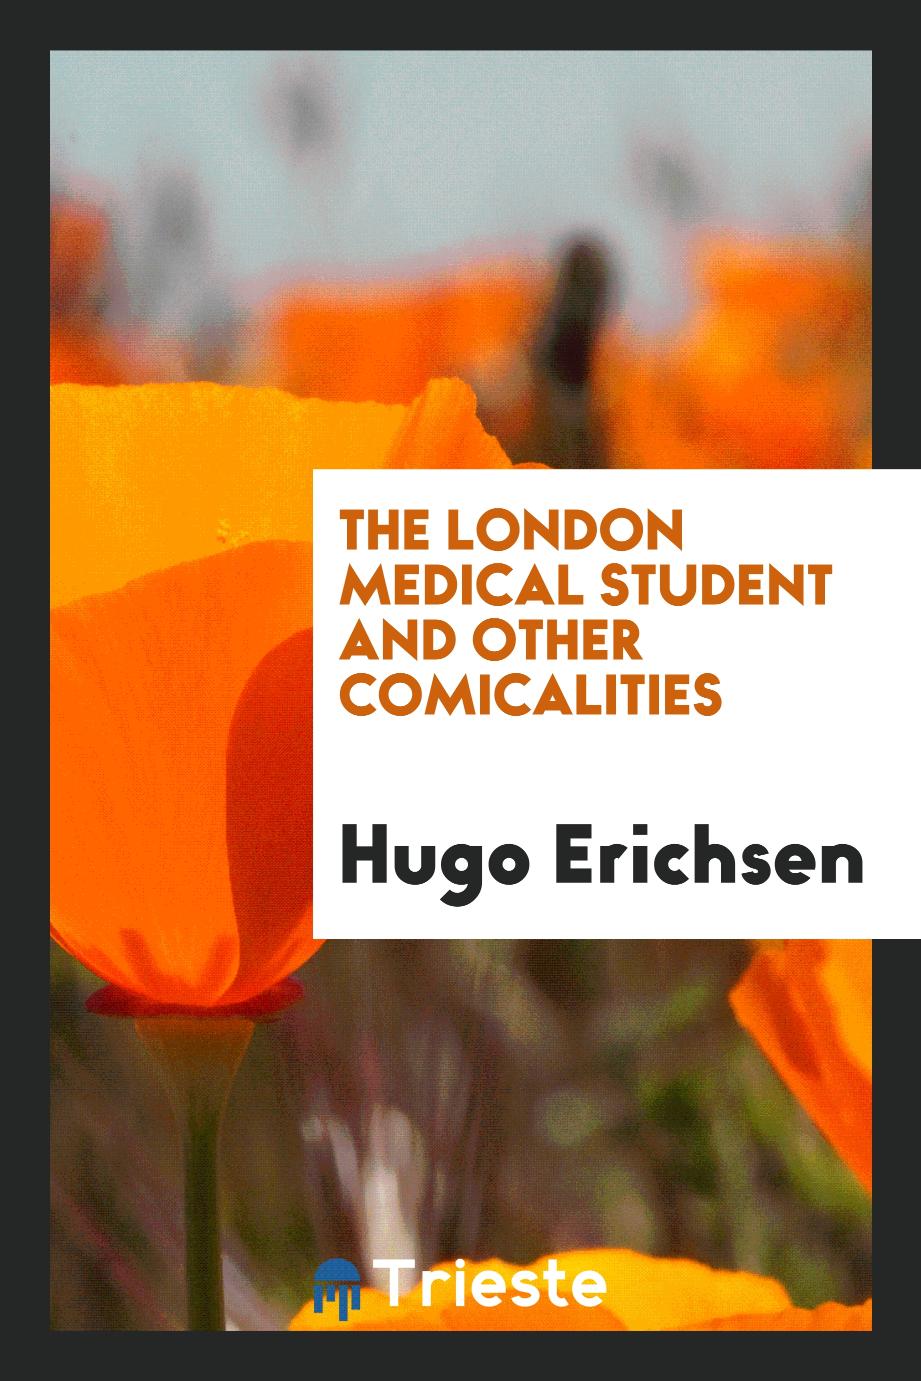 The London medical student and other comicalities